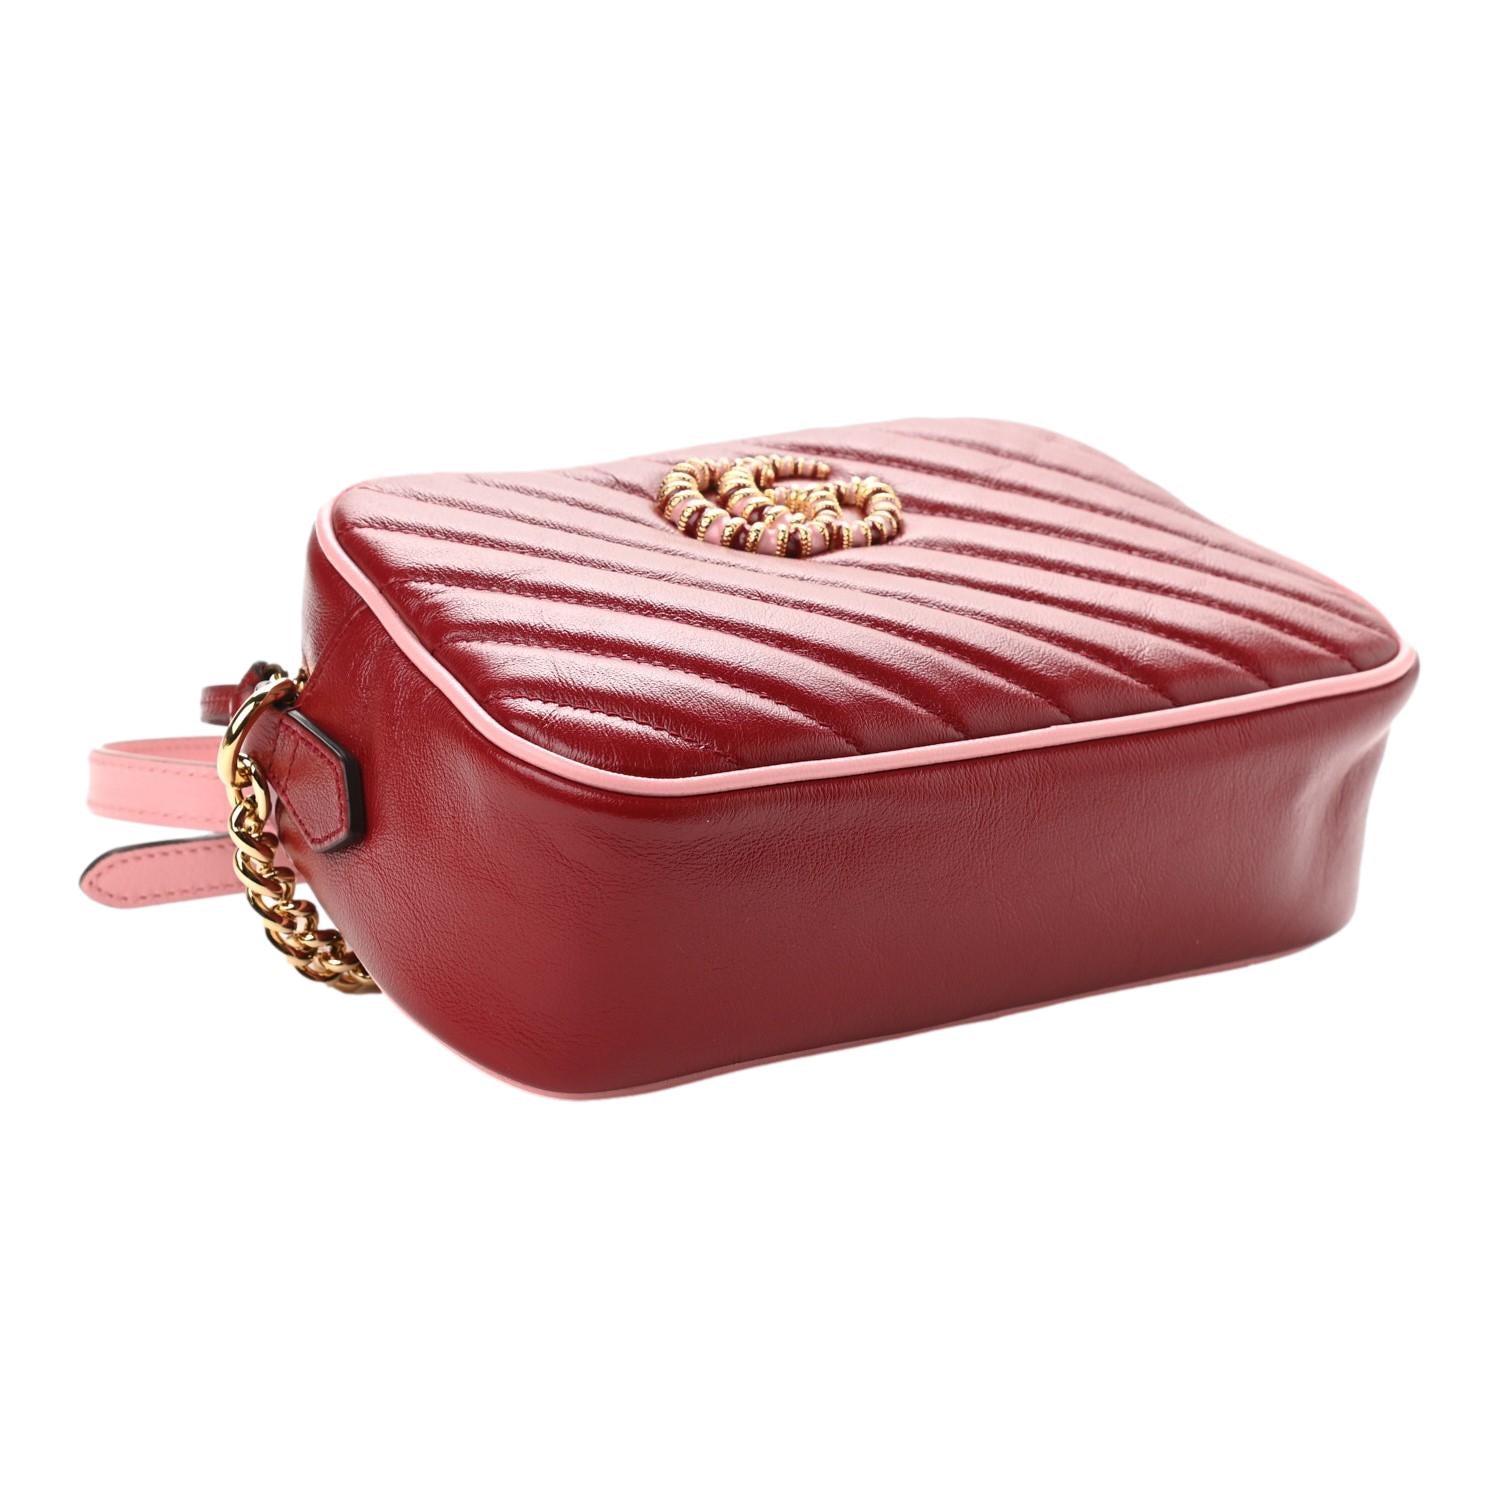 Gucci Marmont Red Leather Diagonal Matelasse Shoulder Bag 447632 at_Queen_Bee_of_Beverly_Hills